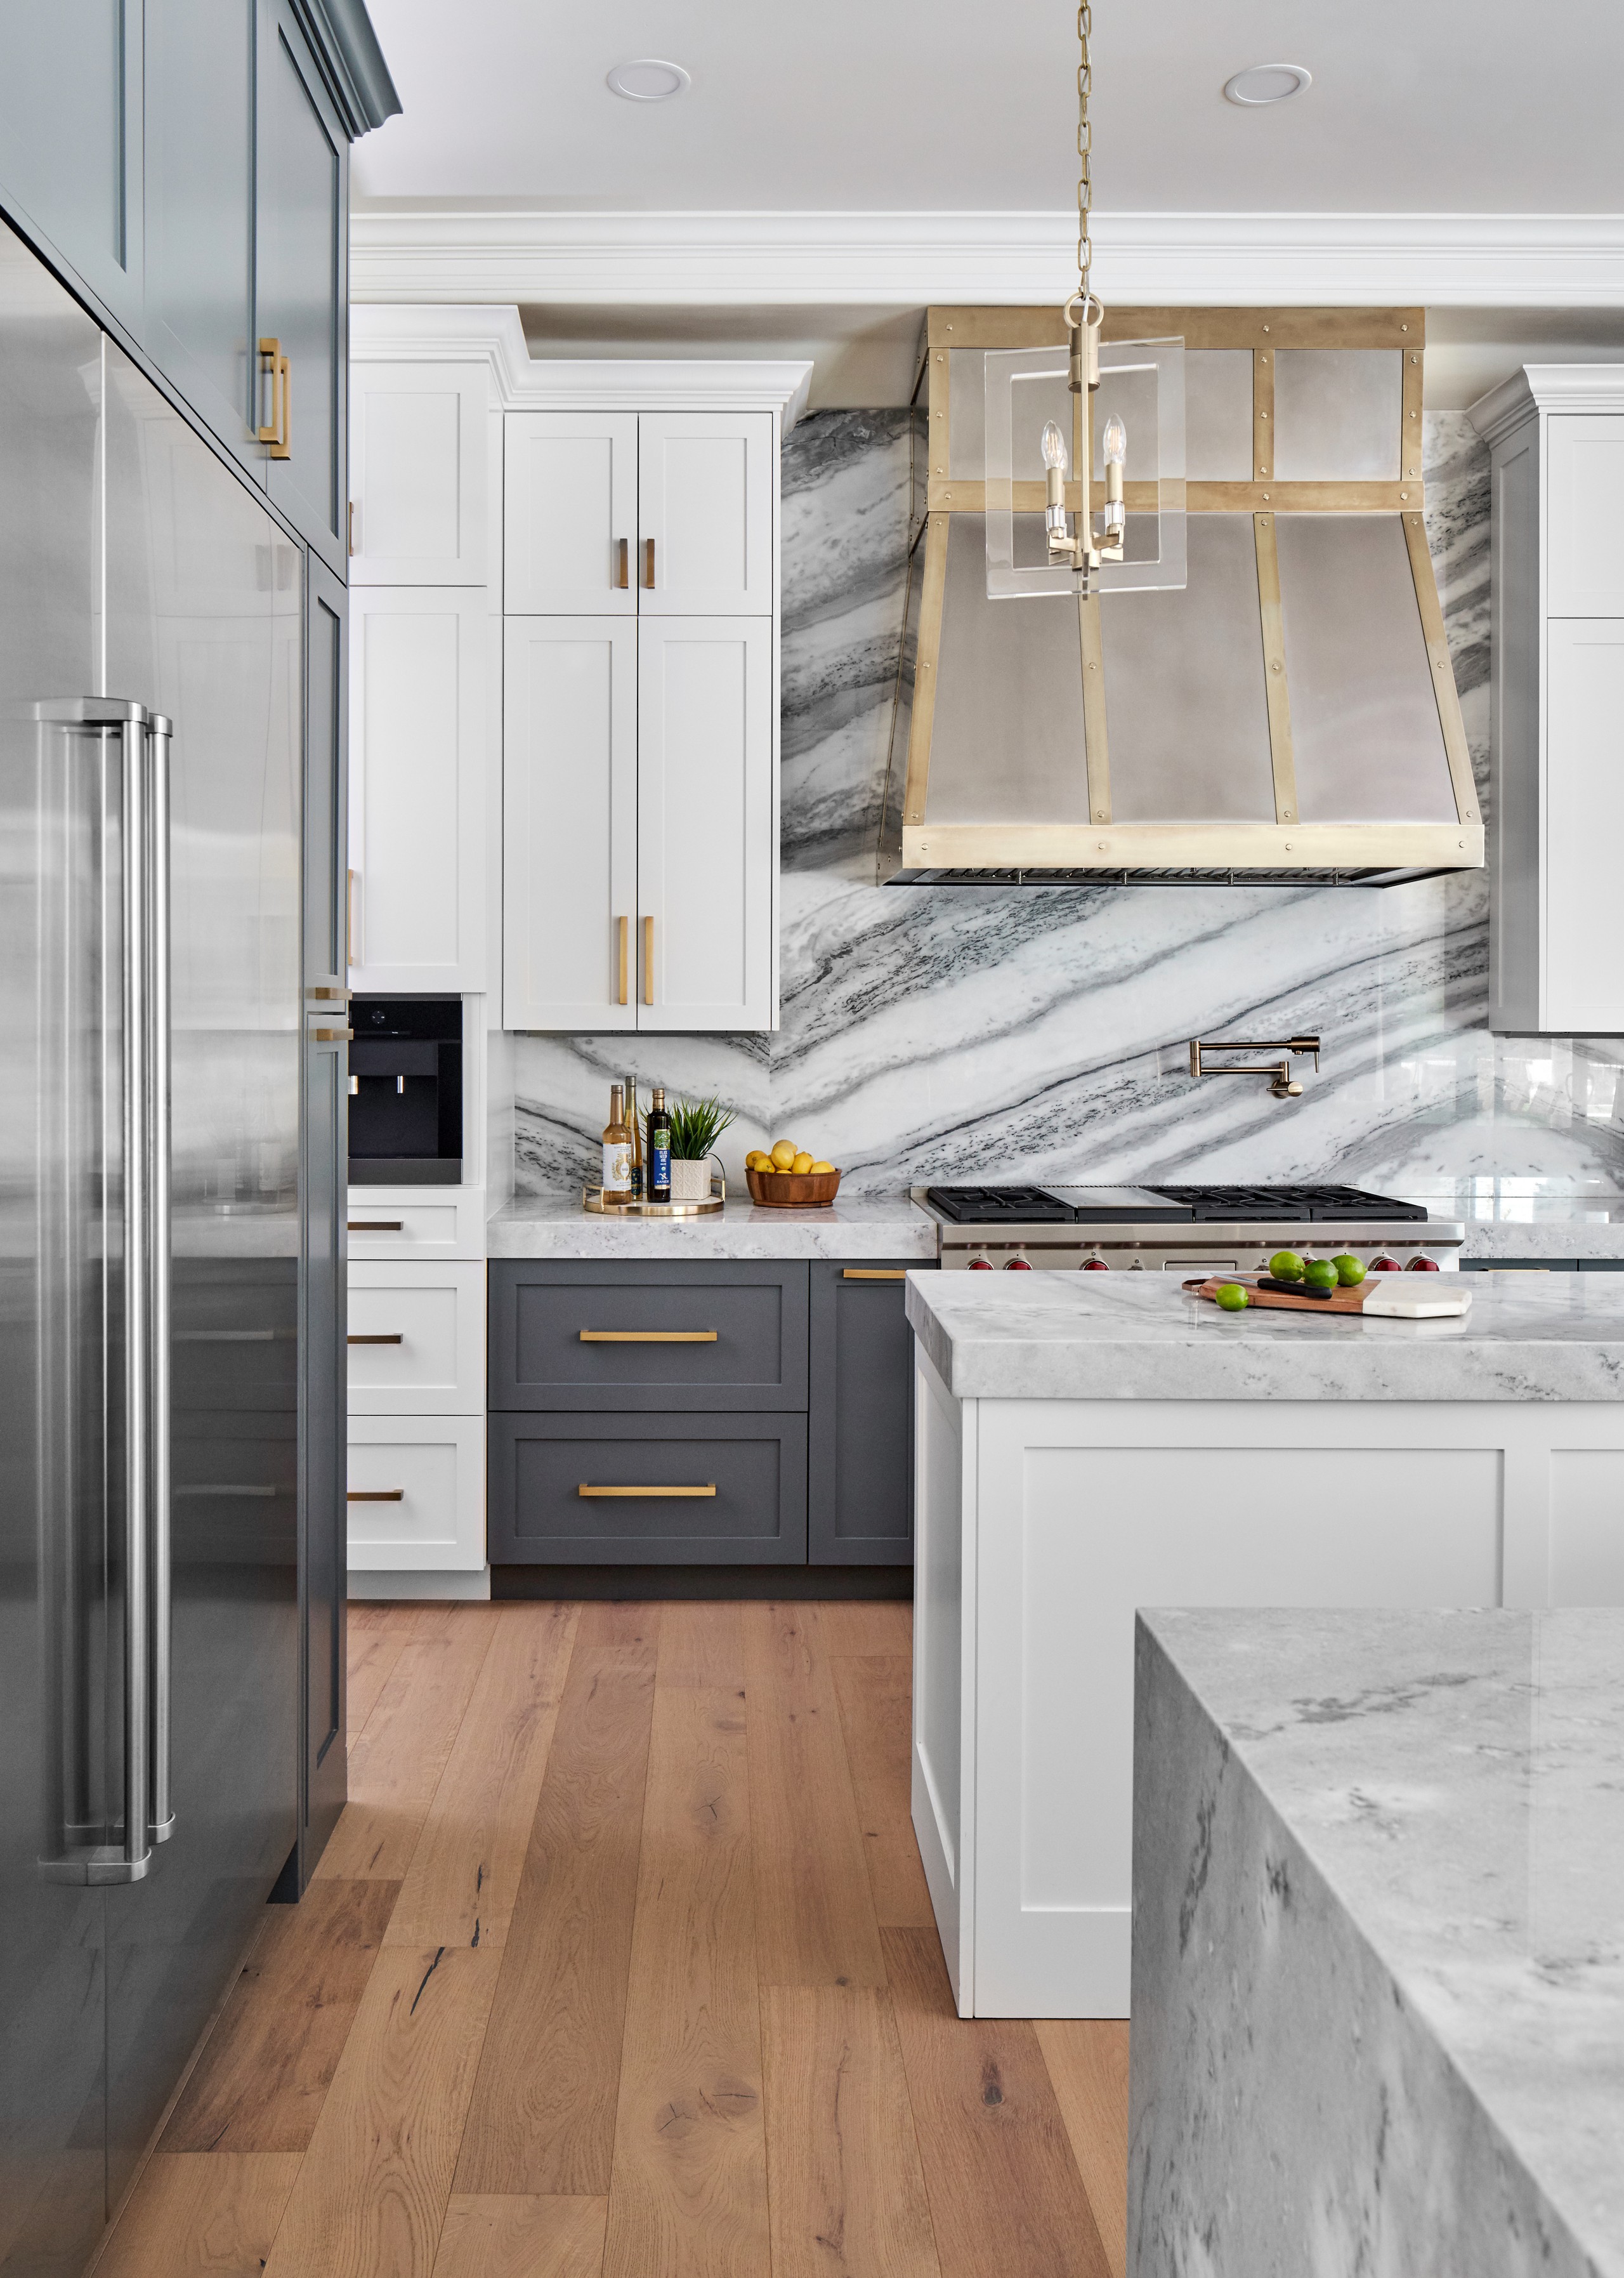 Transitional Kitchen with Marble Backsplash and Stainless Steel Range Hood